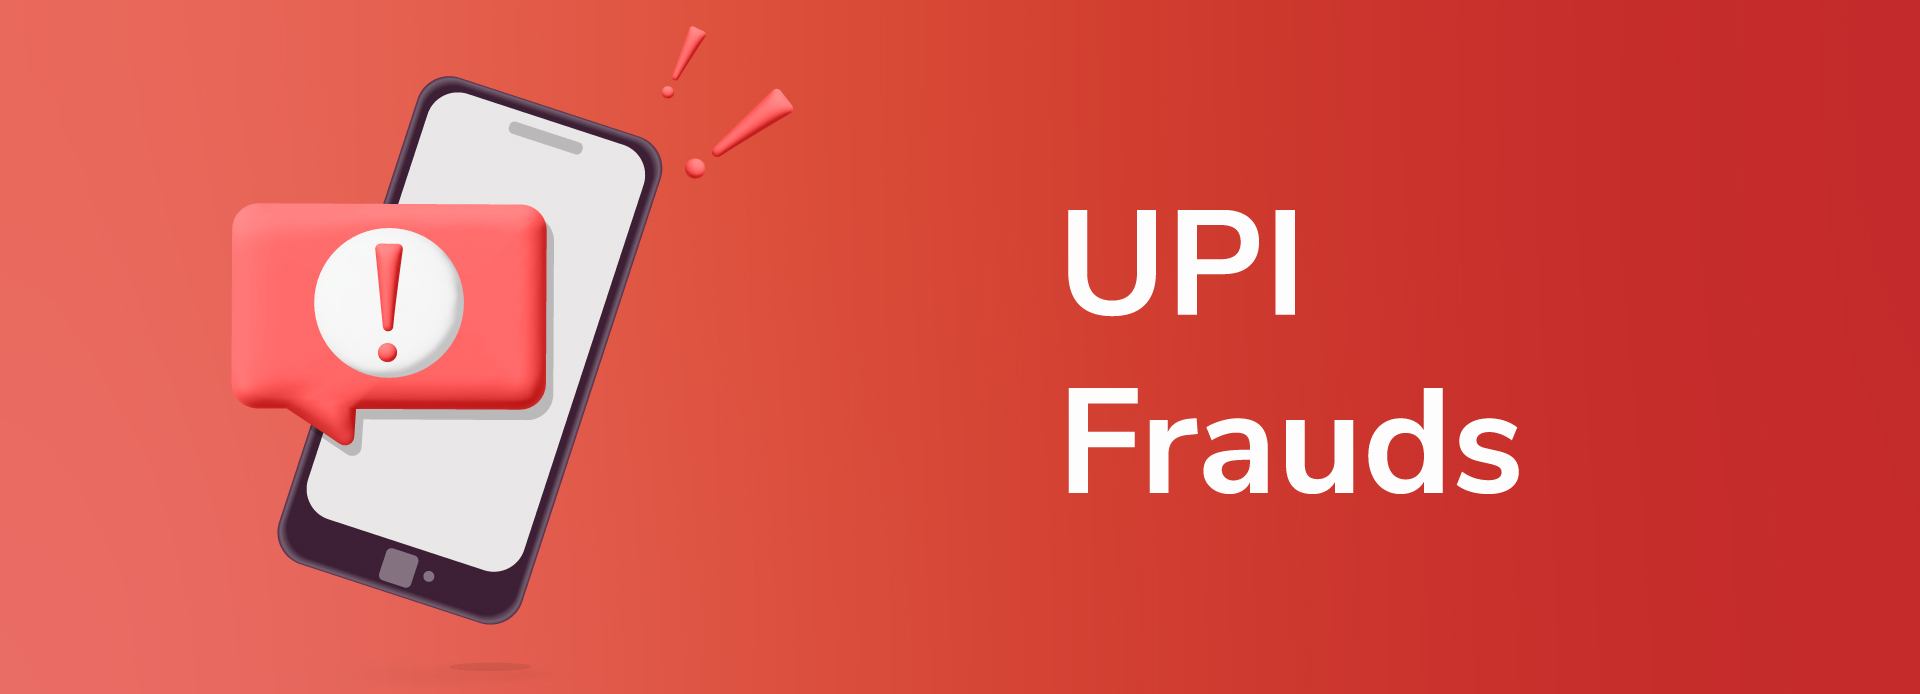 How Do UPI Frauds Happen And How Can We Avoid Them?